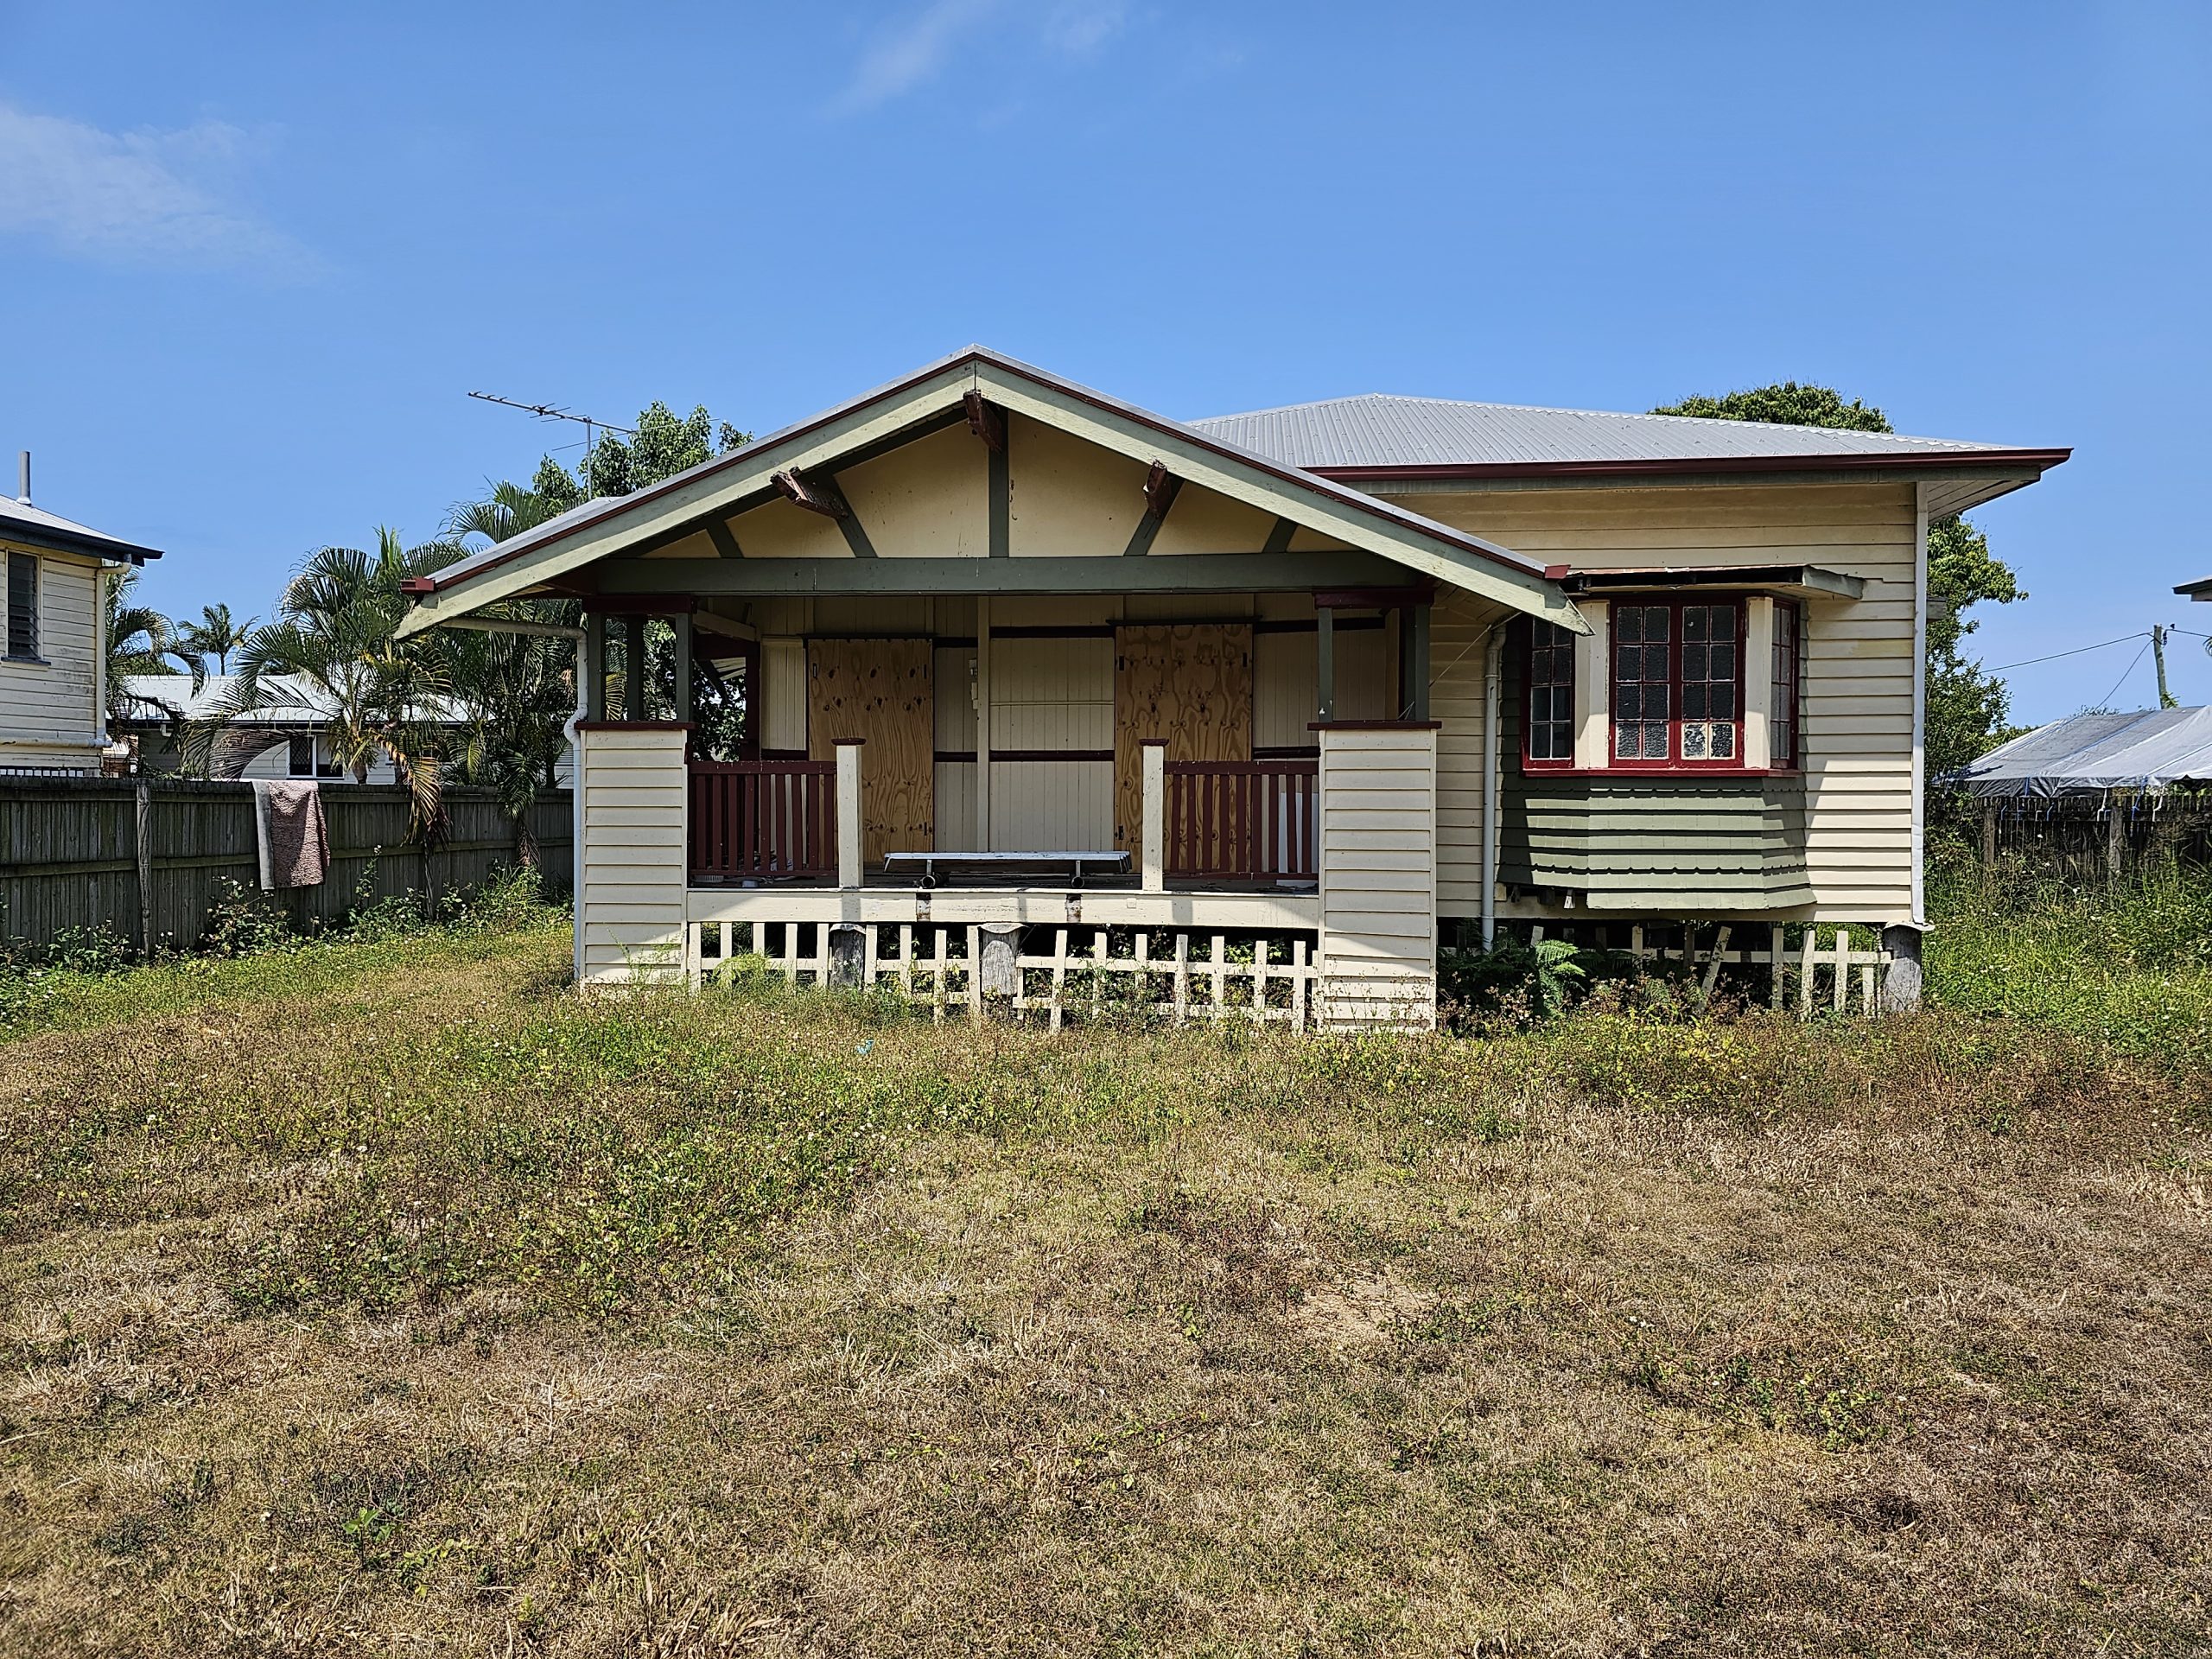 20231102 130038 scaled - Mackay Real Estate